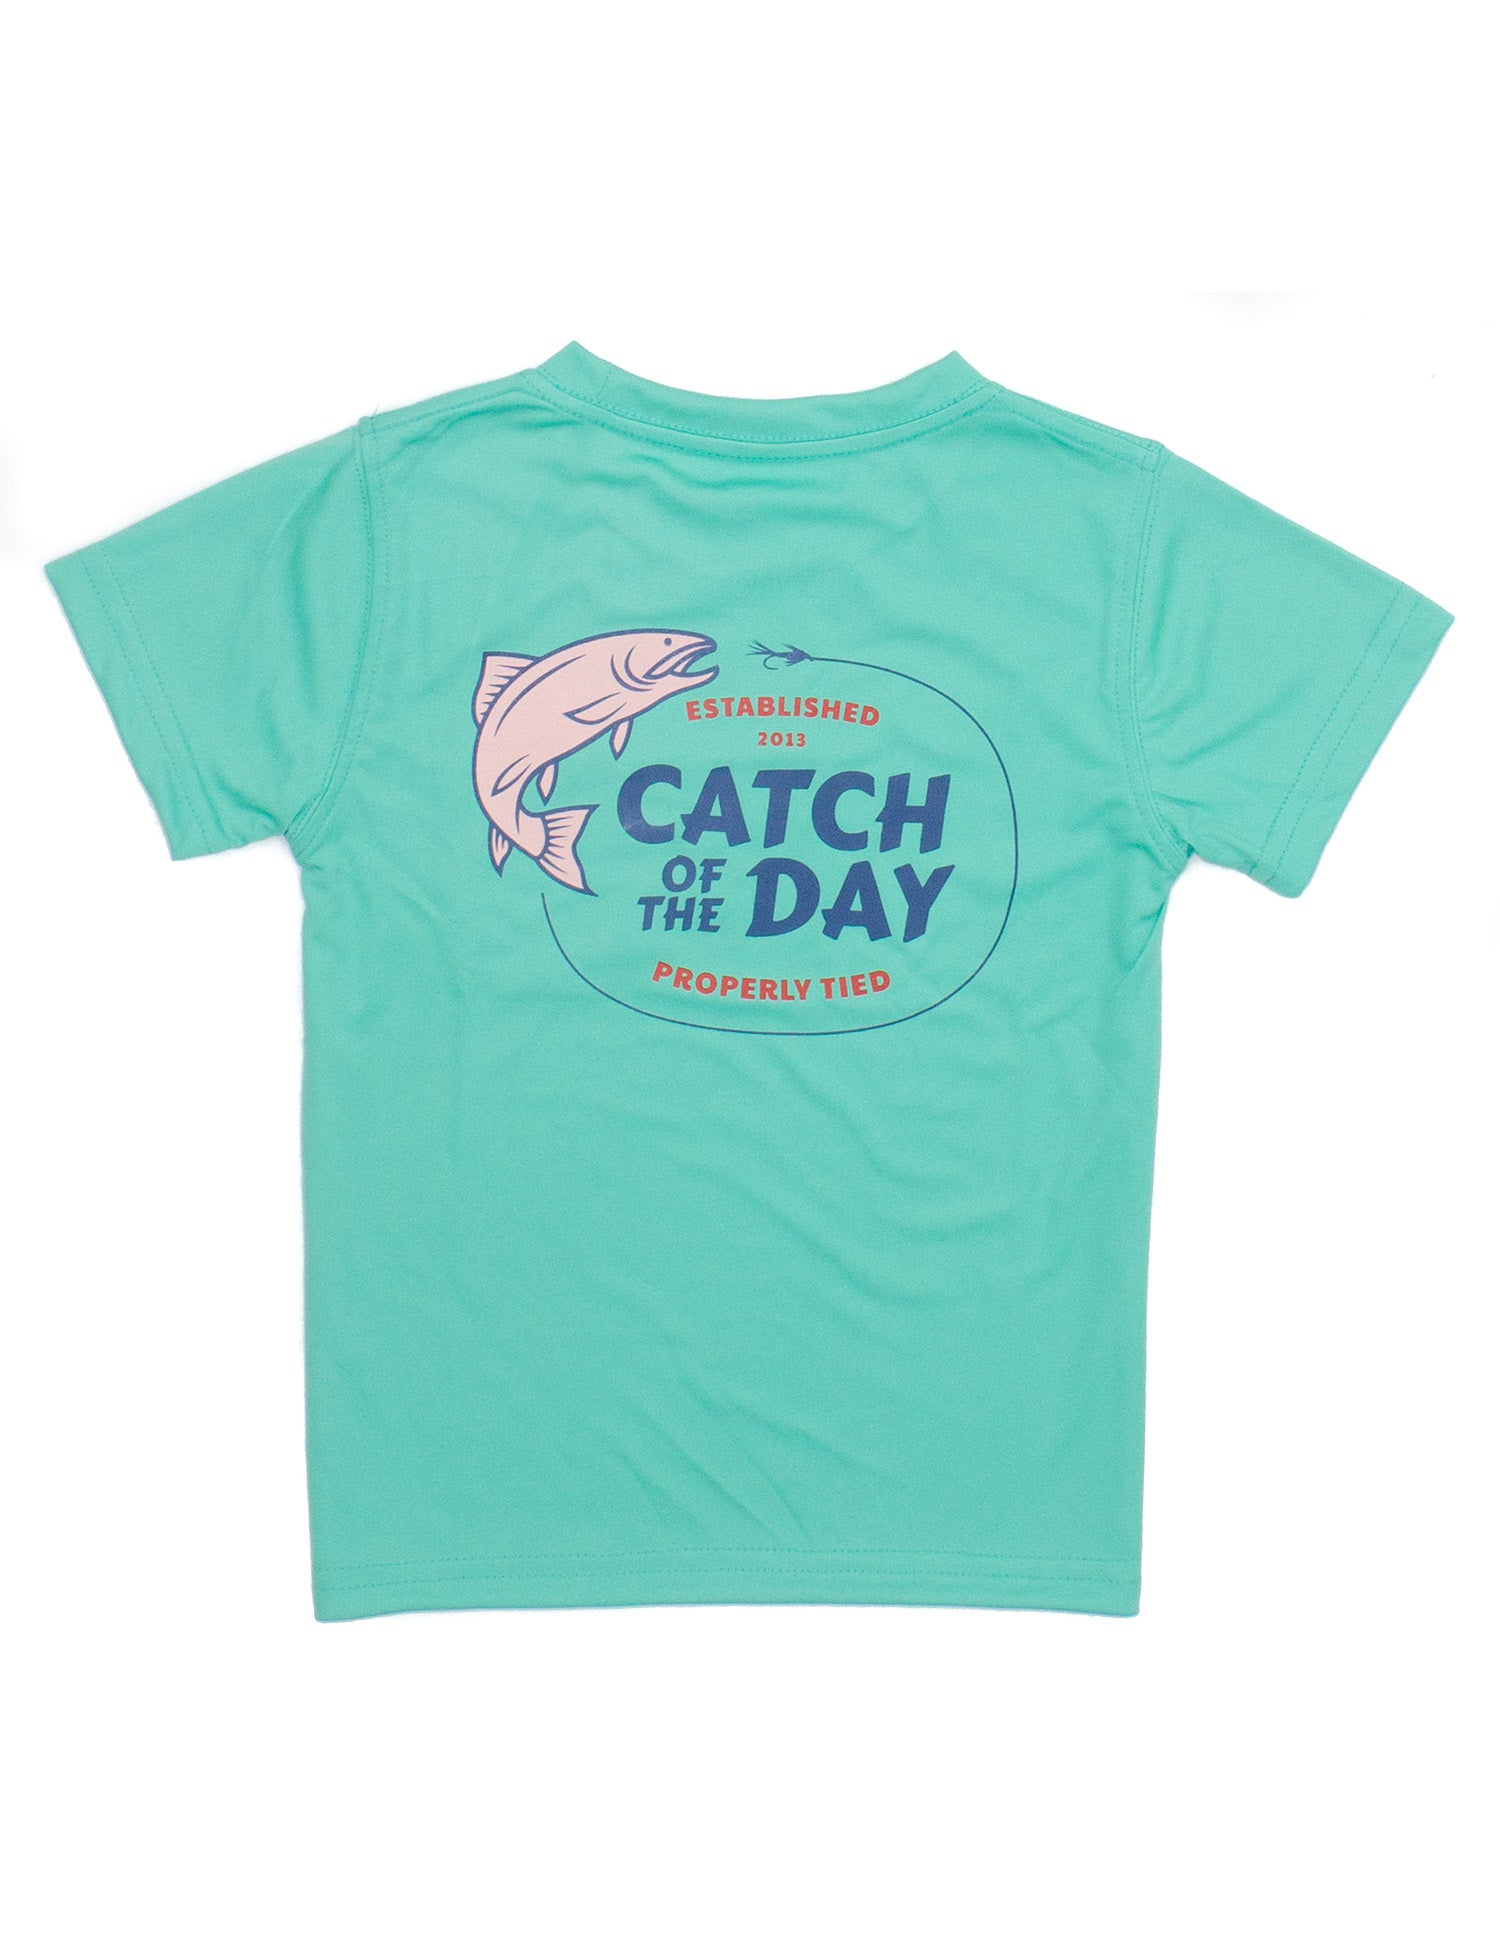 Boys Performance SS Tee Catch Of The Day Soft Green